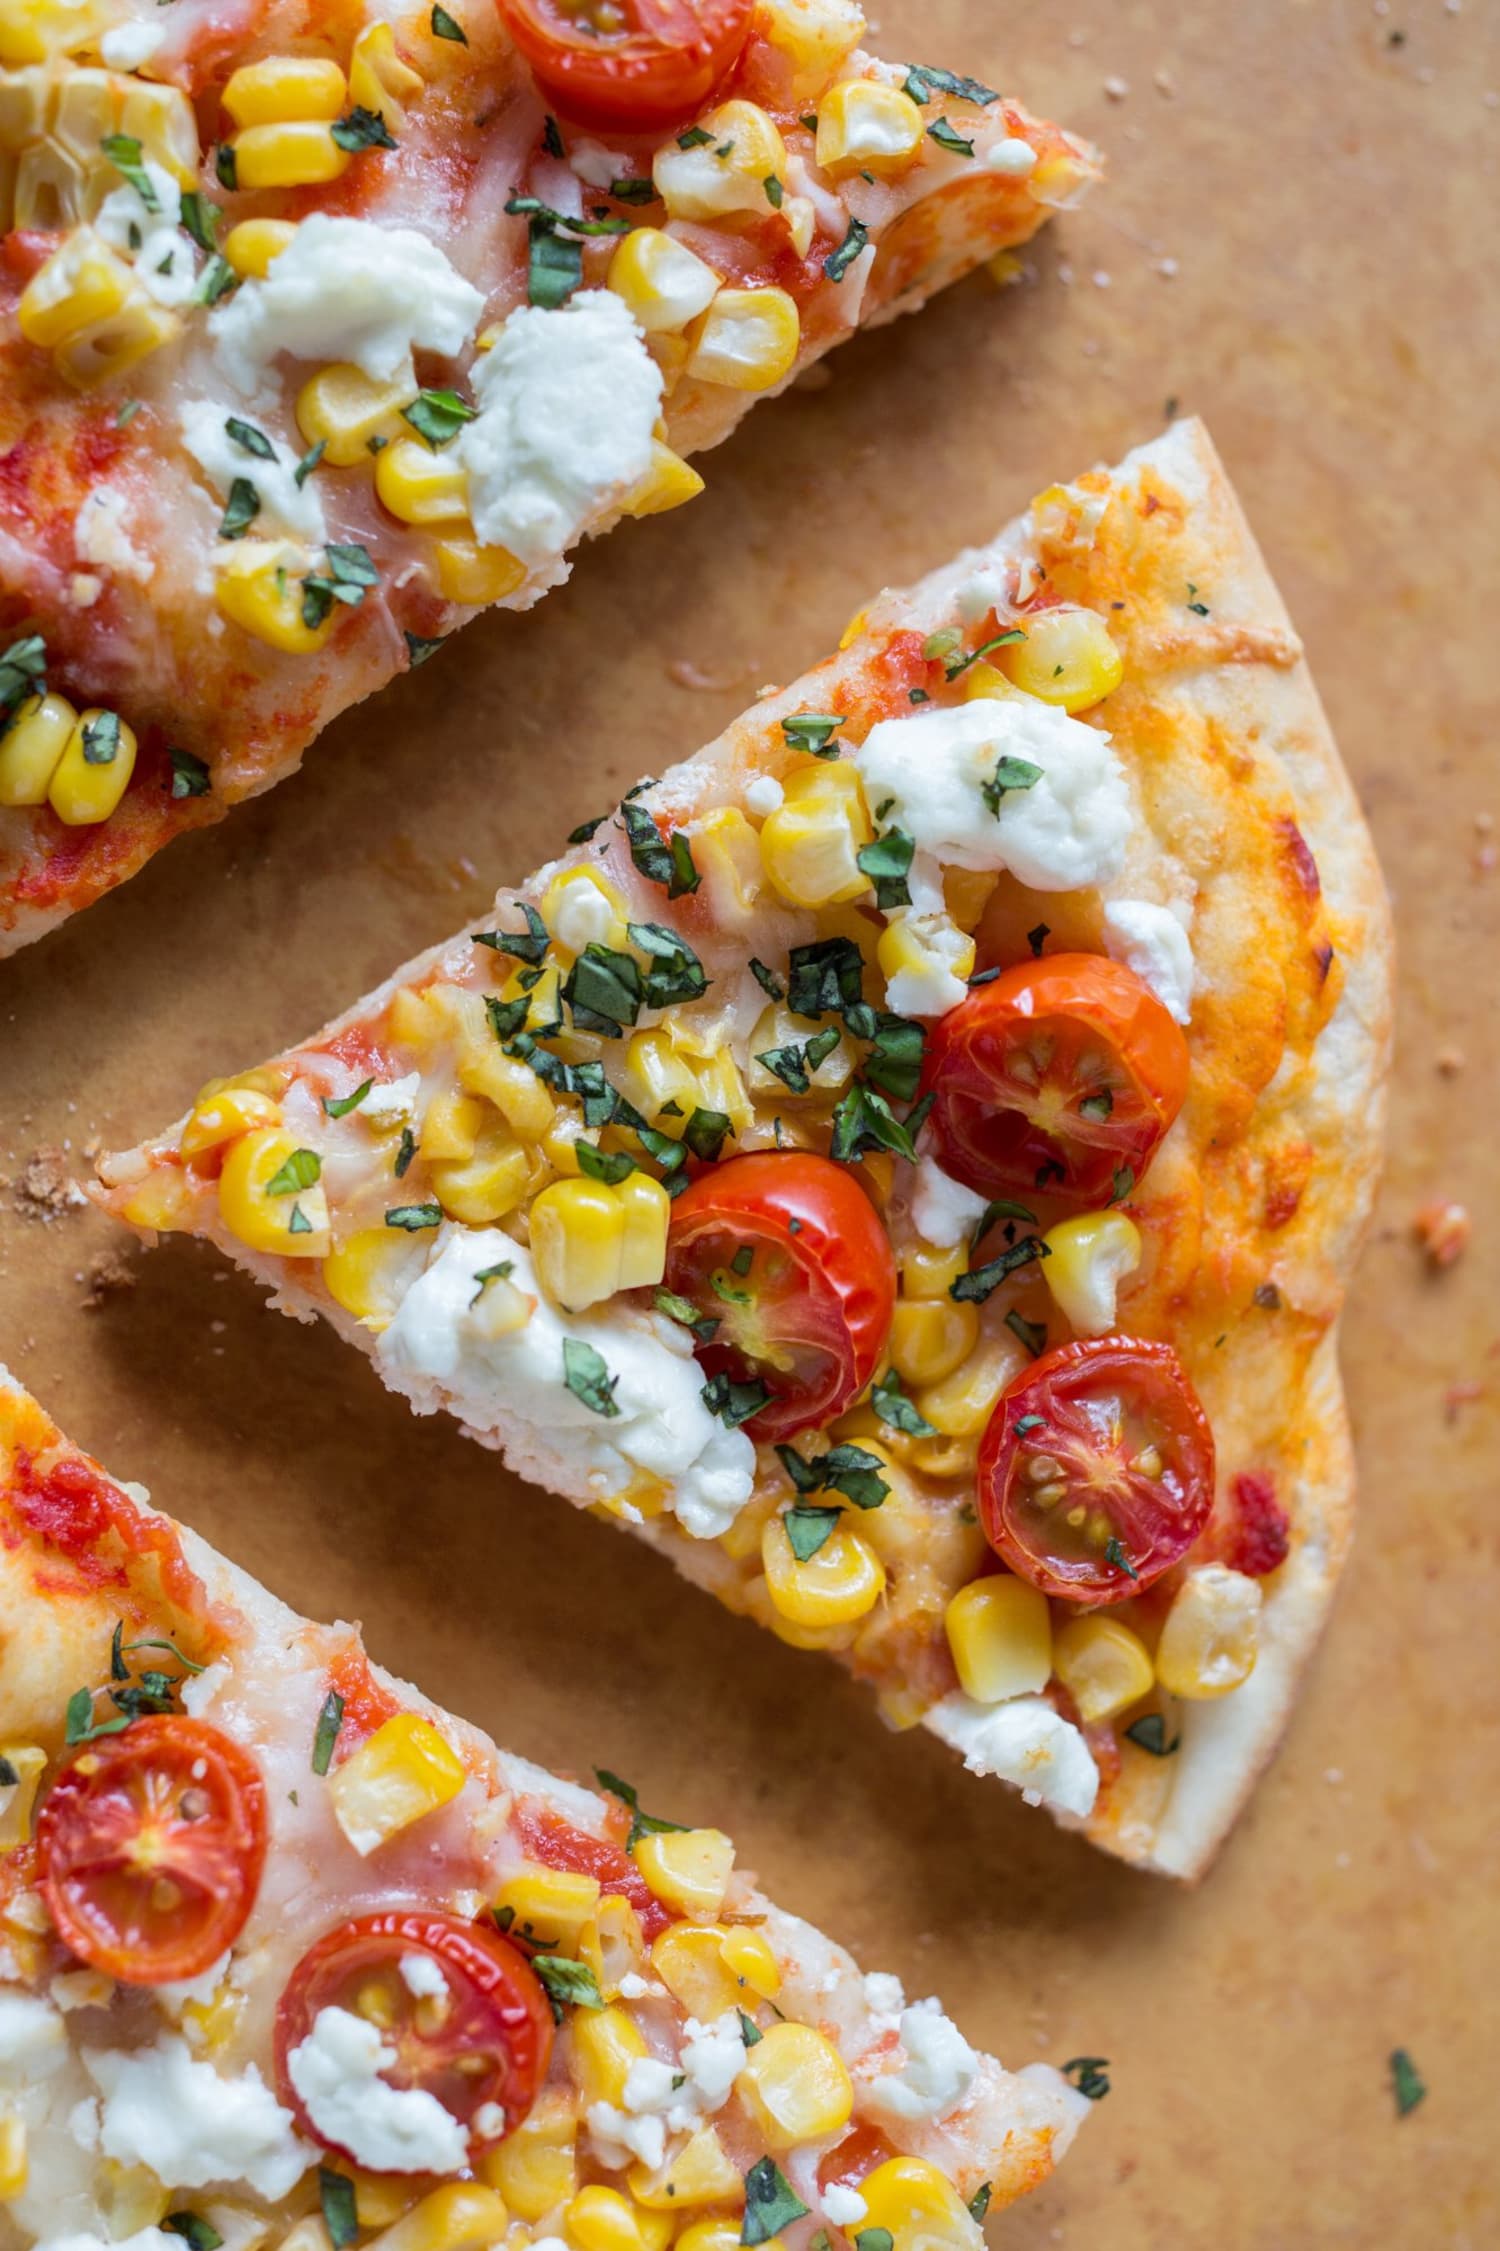 Your Pizza Doesn’t Always Have to Have Mozzarella Cheese | Kitchn